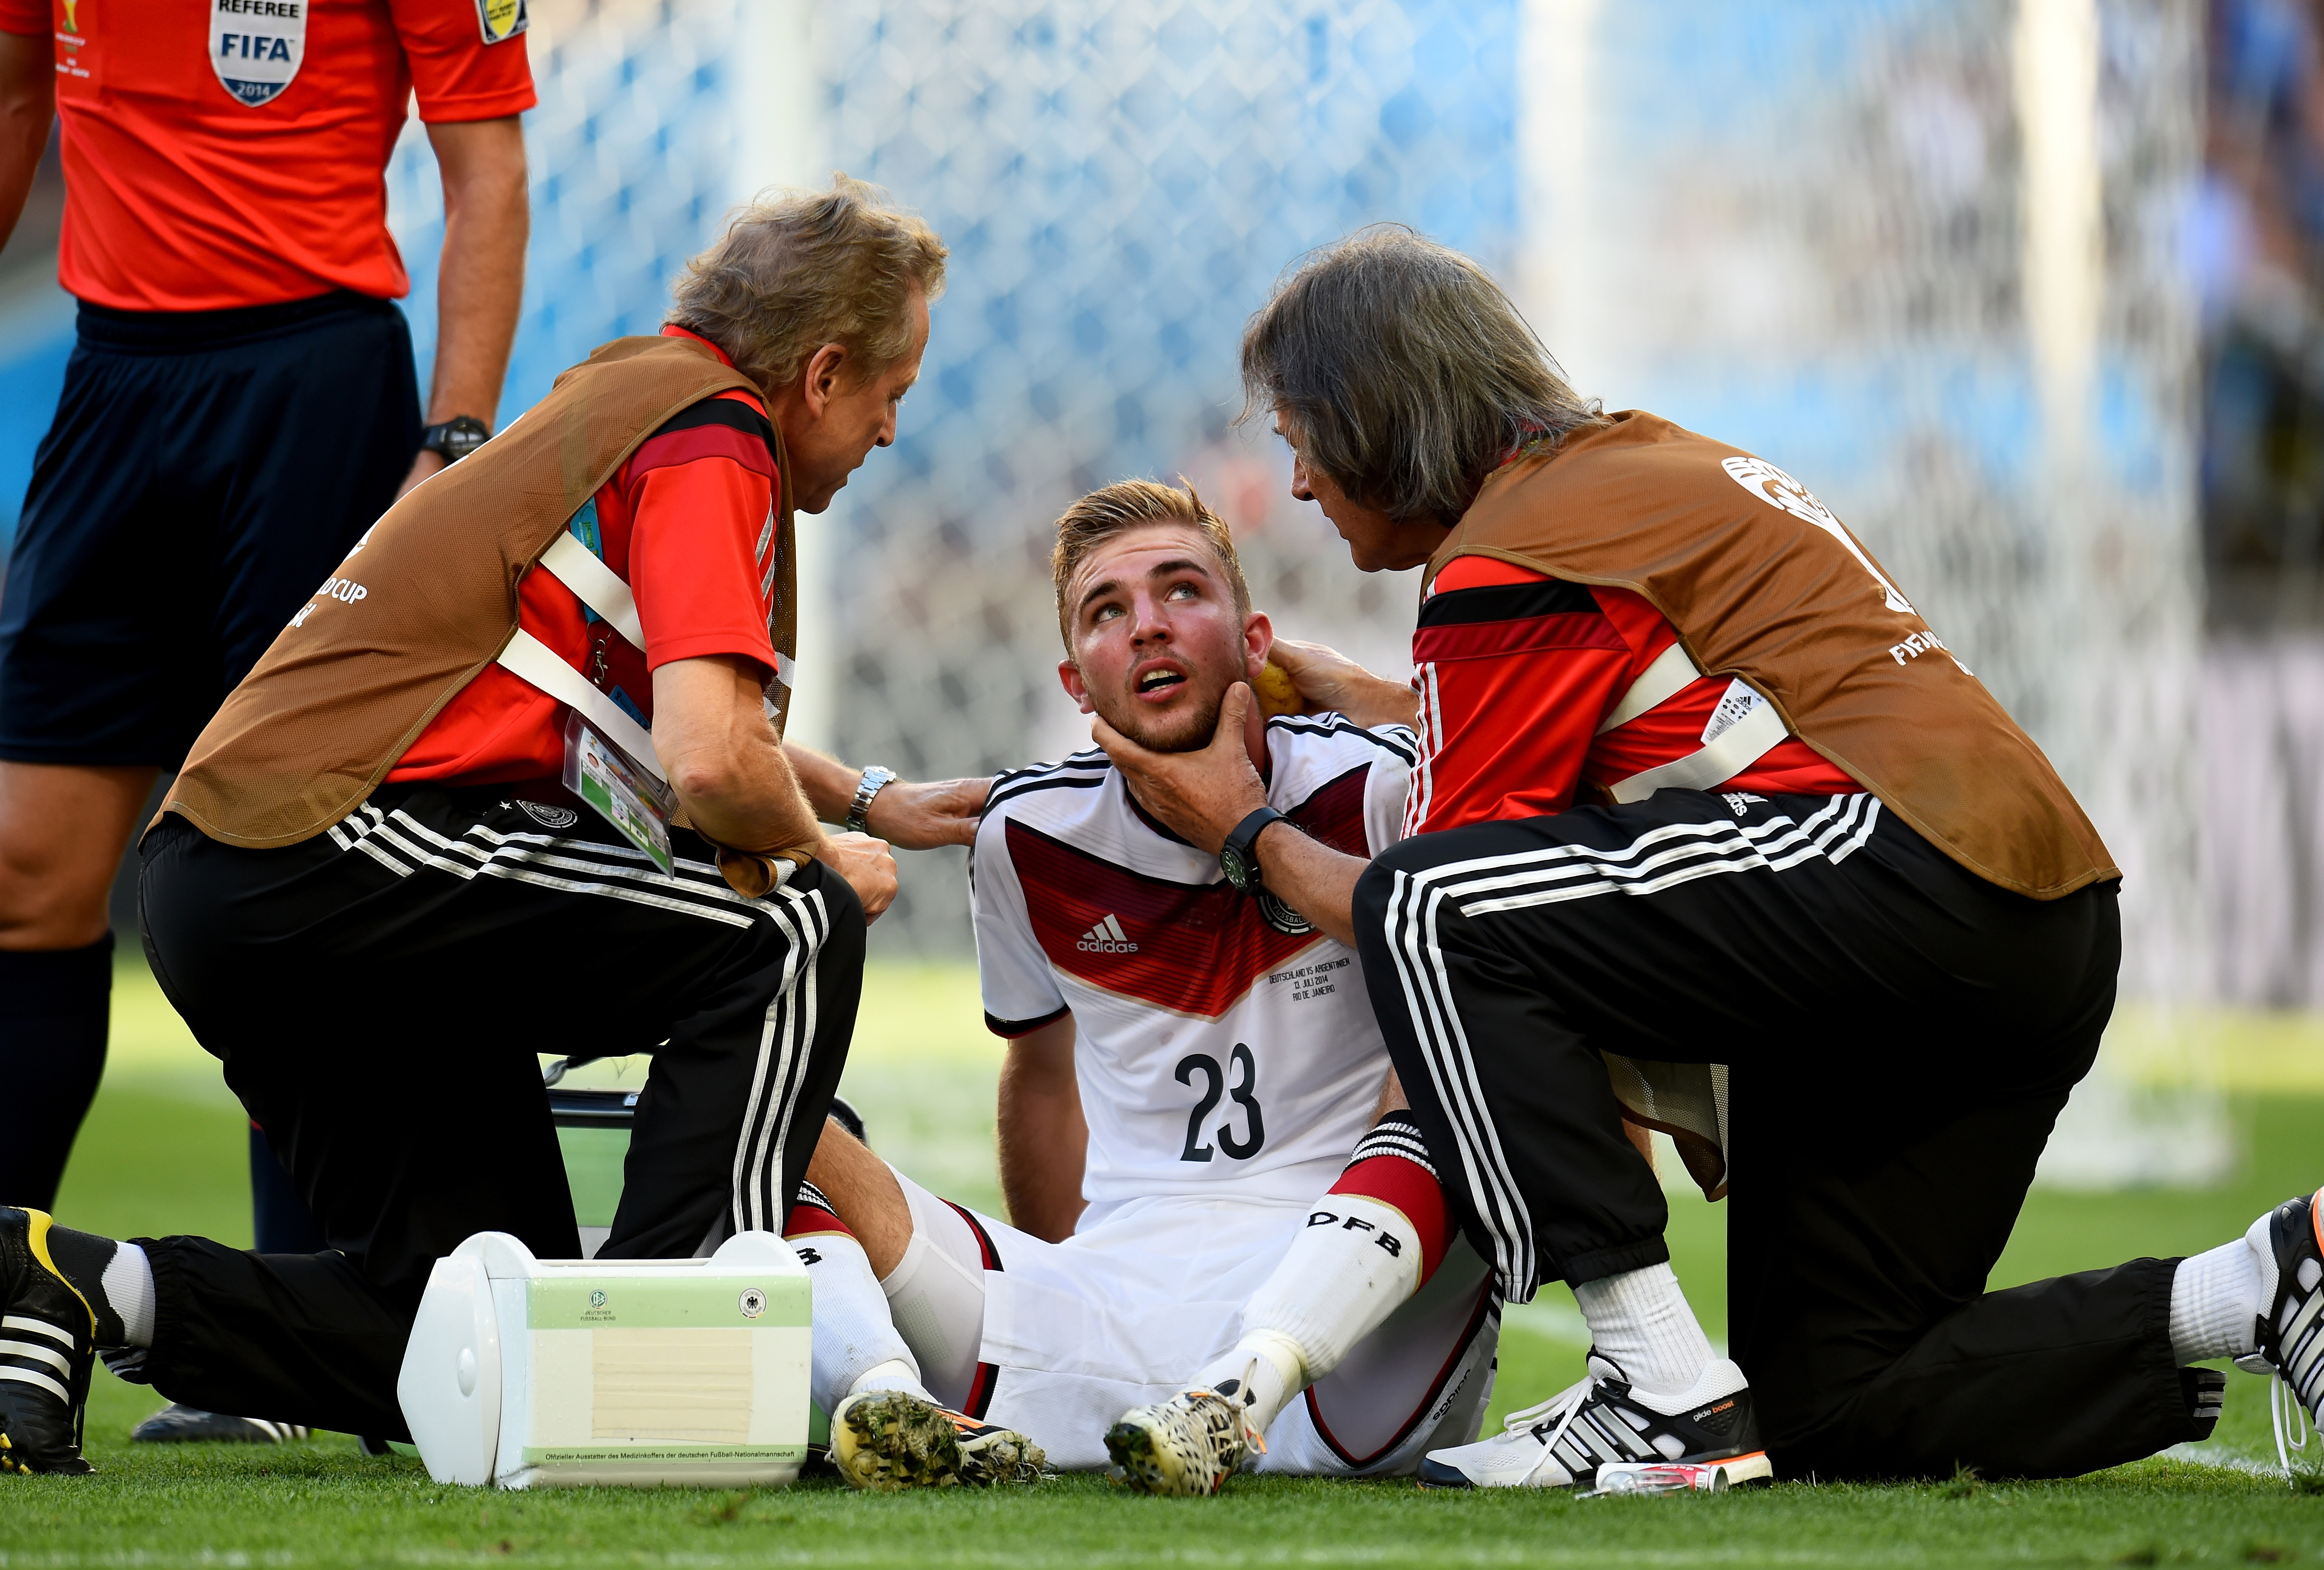 Christoph Kramer of Germany receives a medical treatment during the 2014 FIFA World Cup Brazil Final match between Germany and Argentina on July 13, 2014 in Rio de Janeiro.